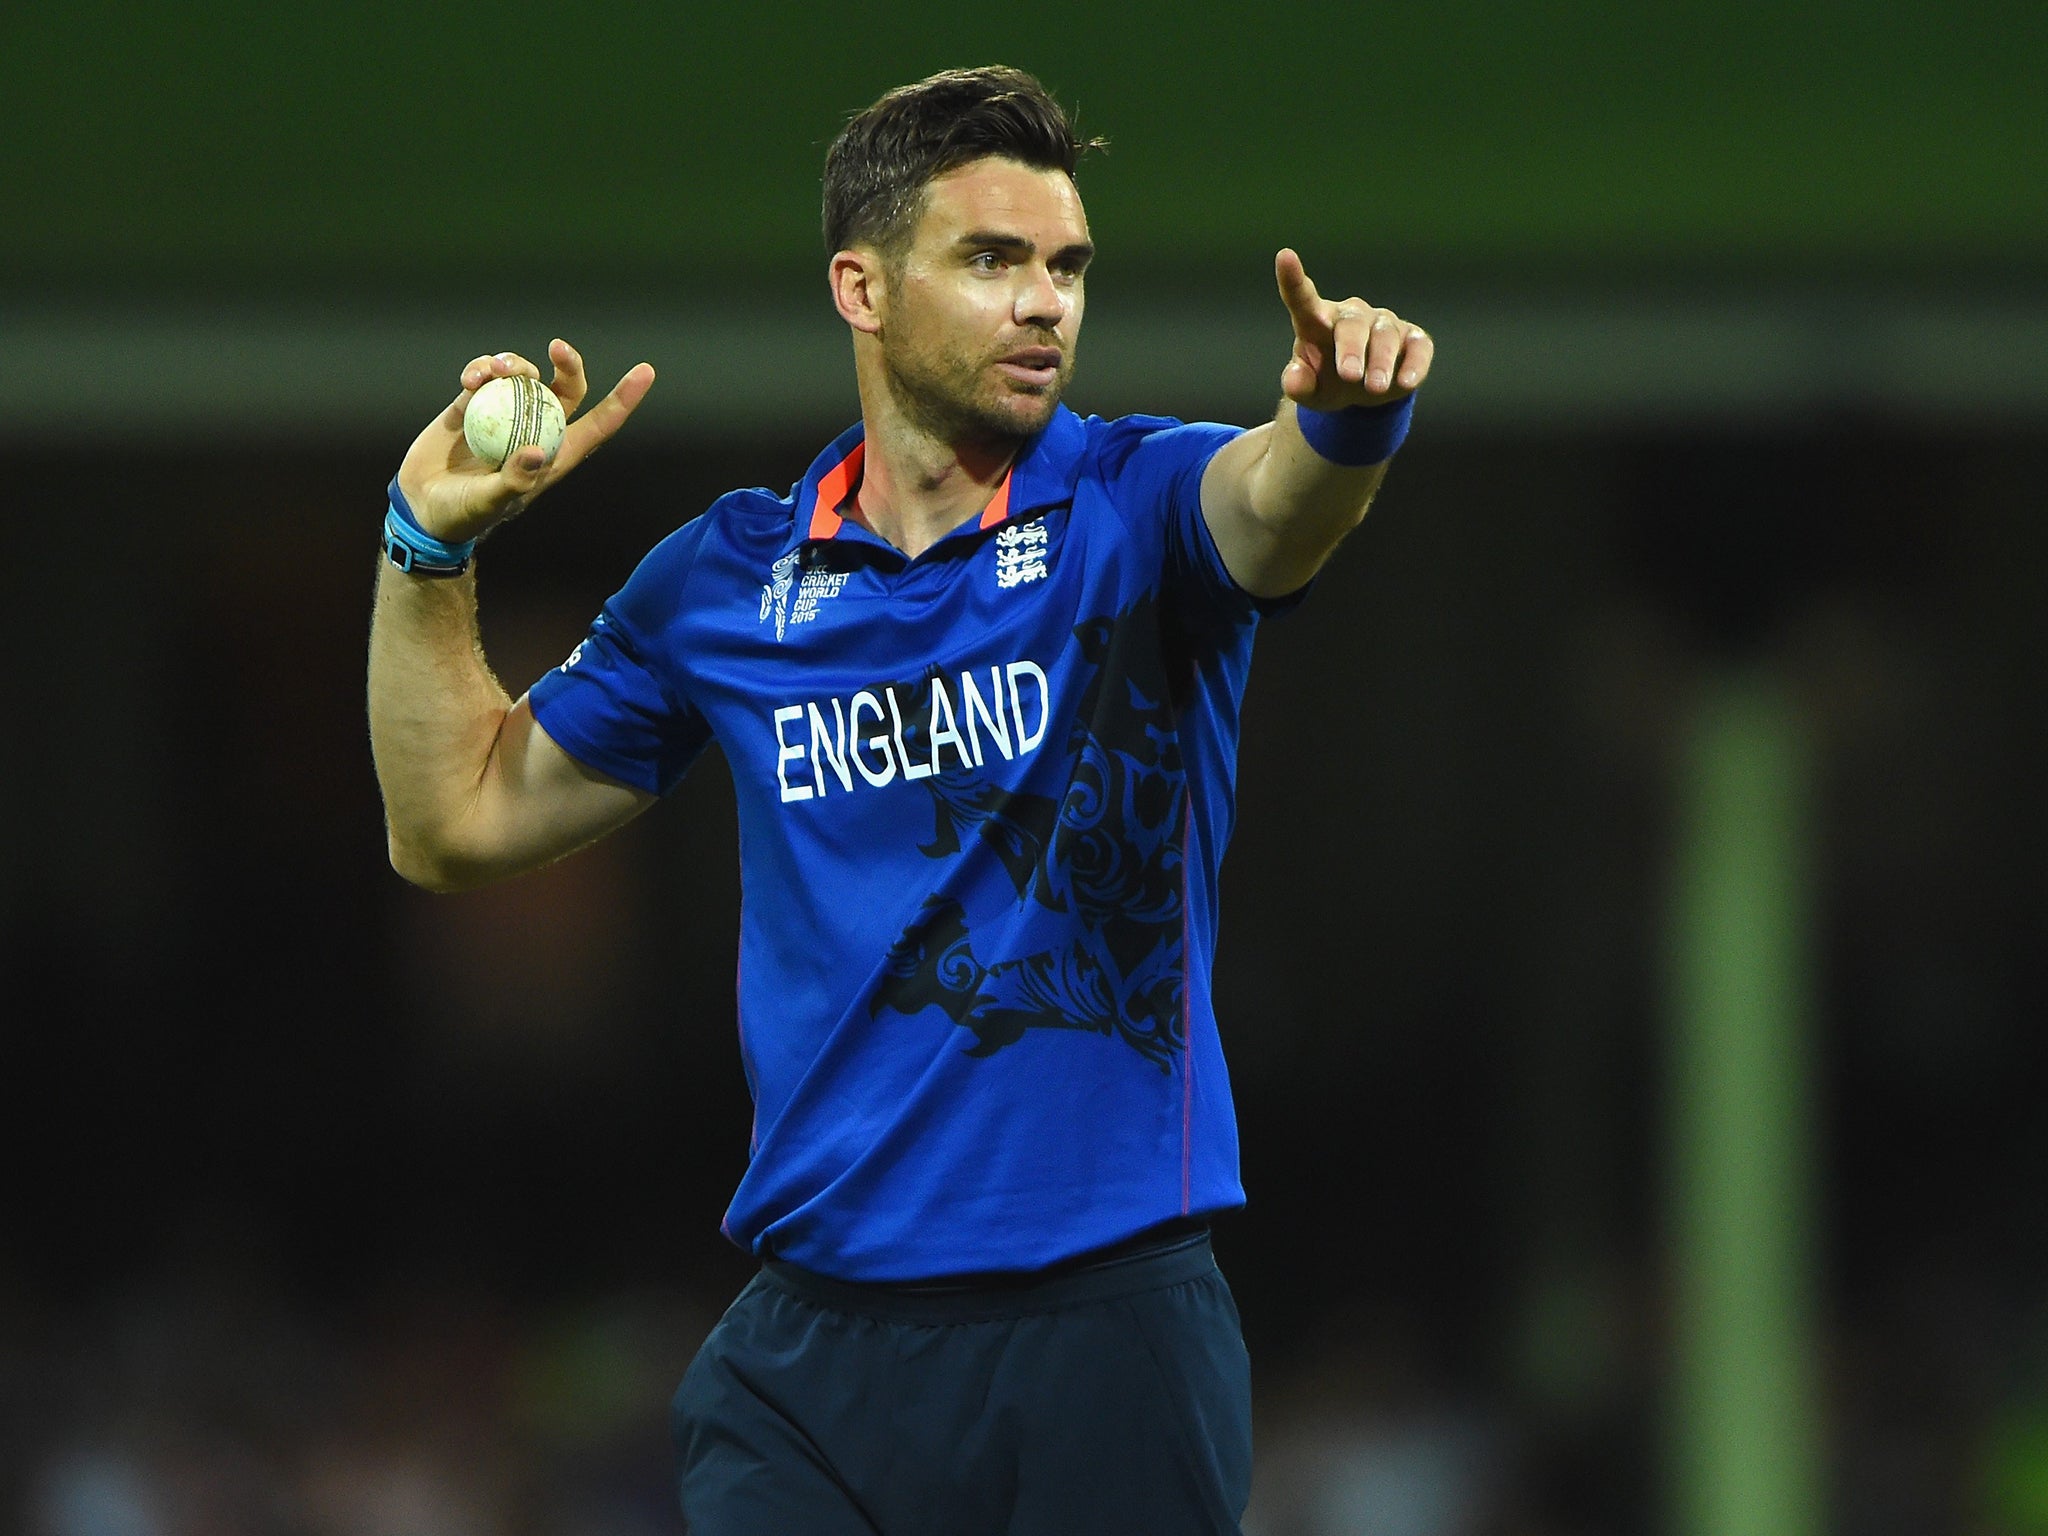 England will rely on the swing of James Anderson at the top of the order but can they stop runs at the death?